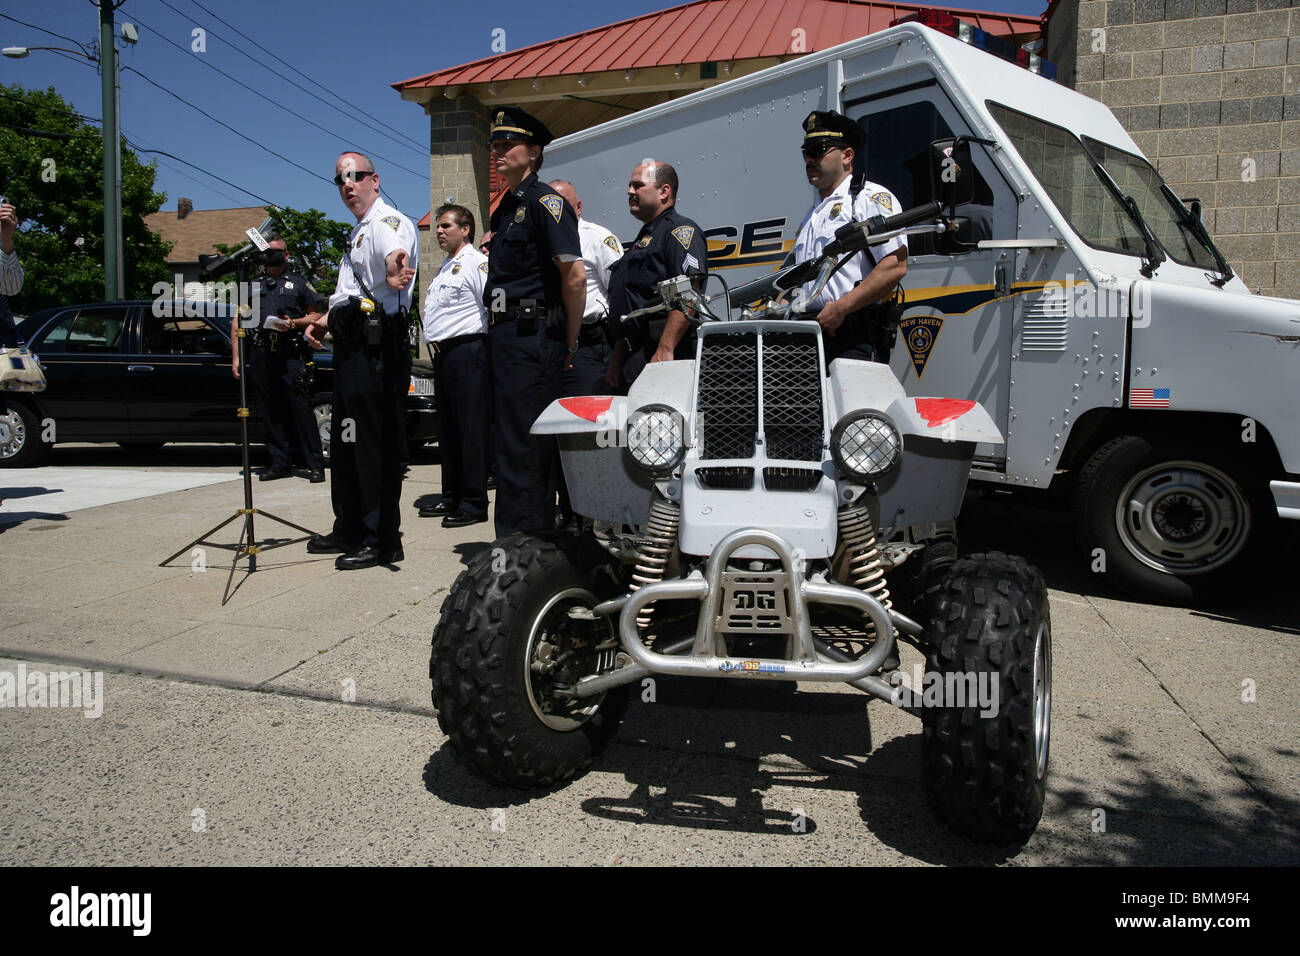 New Haven police show off an ATV that they confiscated on city streets. The city is cracking down on dirt bikes and ATV's. Stock Photo